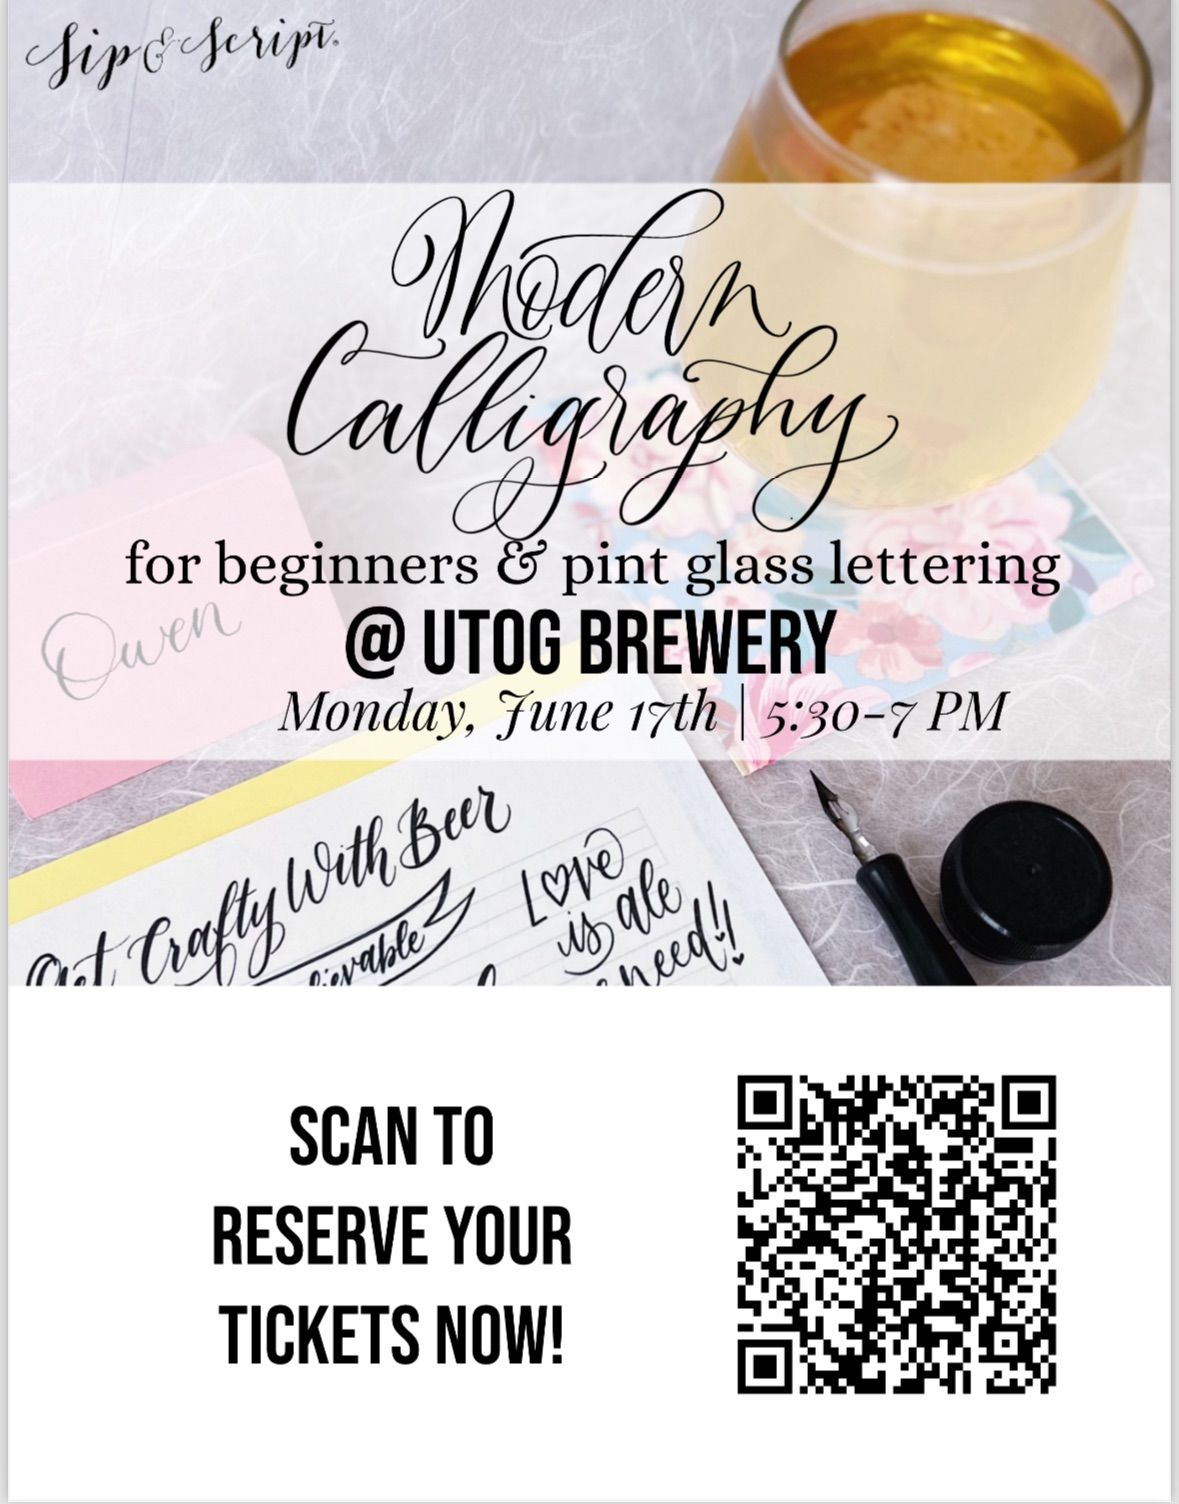 Modern Calligraphy & Pint Glass Lettering for Beginners @ UTOG Brewery